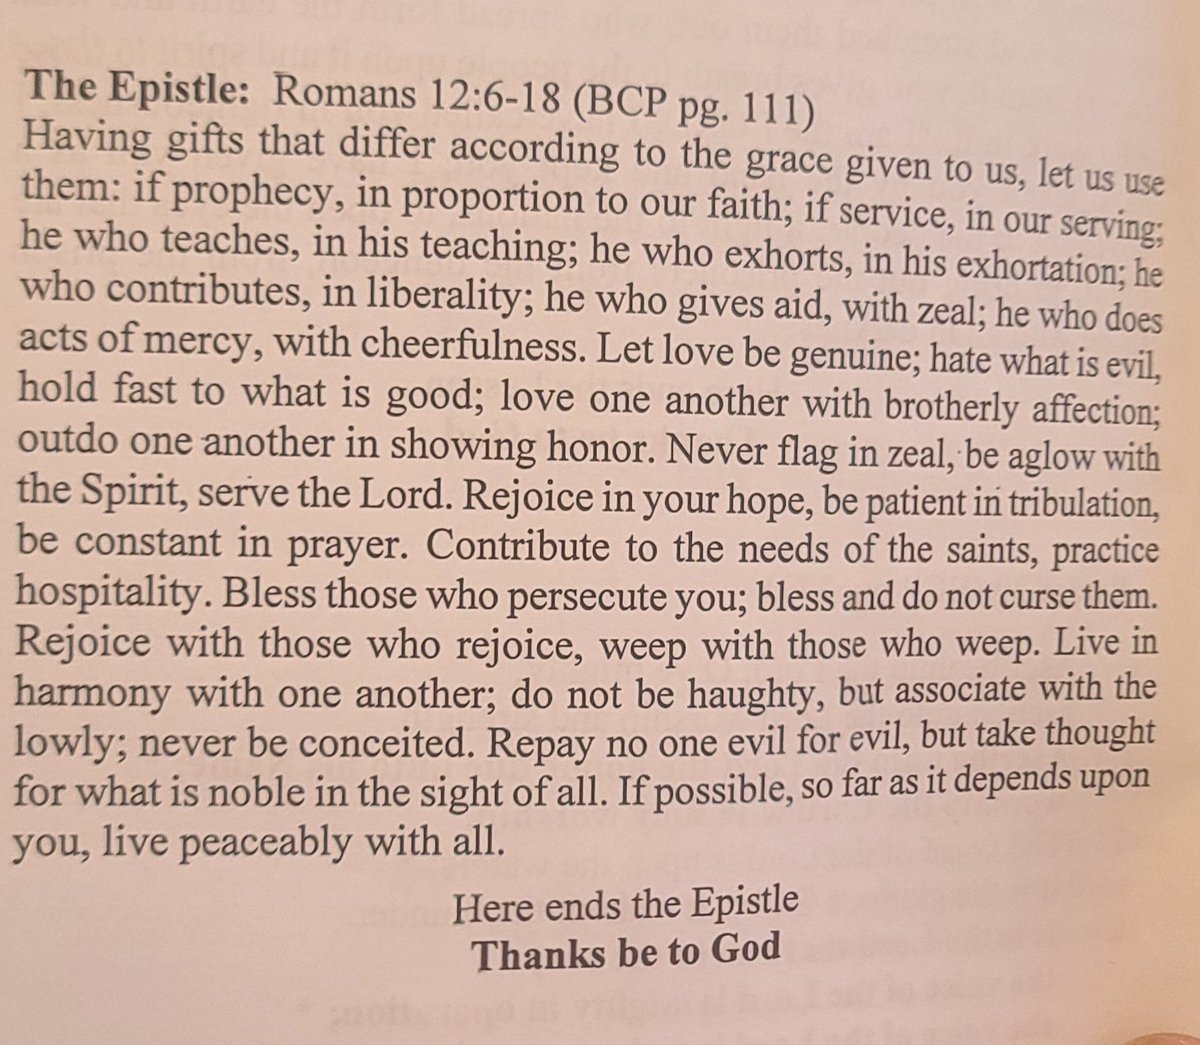 By far one of my favorite pieces of scripture.
#Faith
#SpreadTheGospel
#Anglican

'Bless those who persecute you, bless and do not curse them'

It's up to you within the bounds of the things that you can control, to live in peace with all.

Romans 12: 6-18